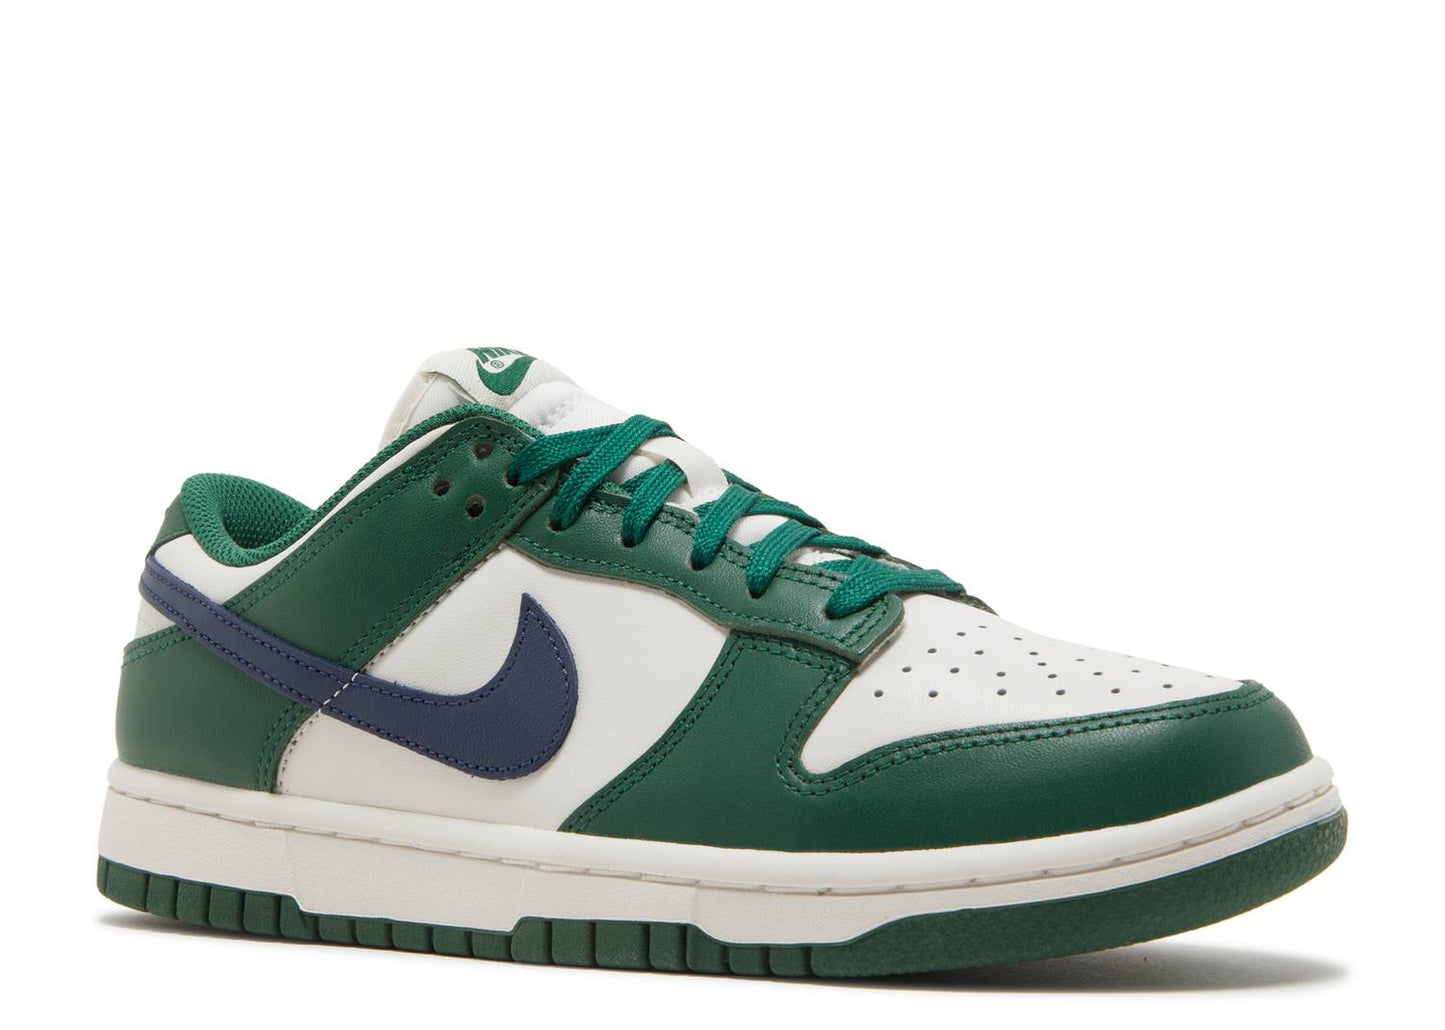 NIKE DUNK LOW 'GORGE GREEN' WMNS